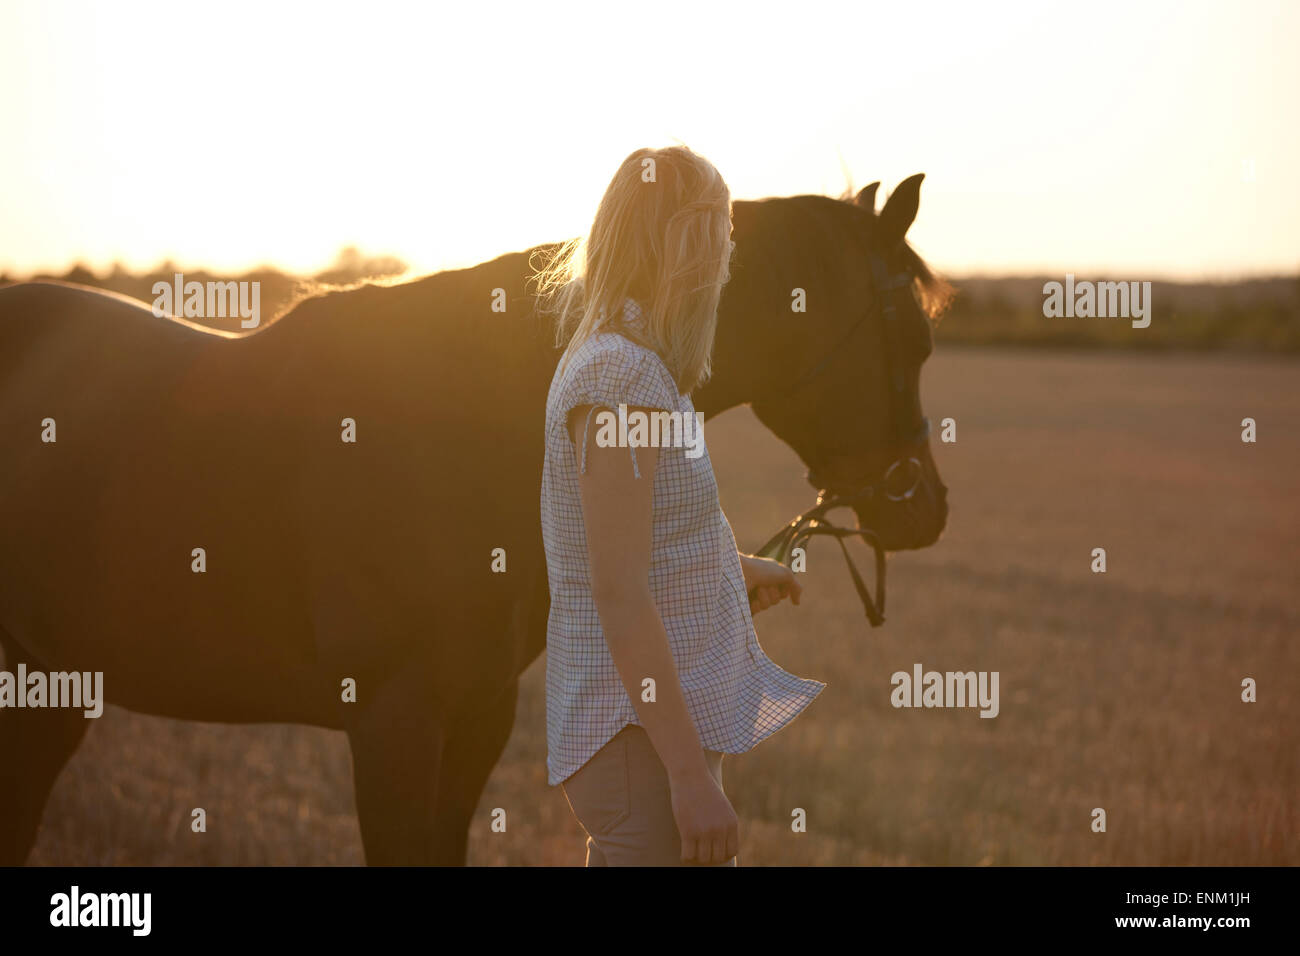 A young woman leading an Arabian horse Stock Photo